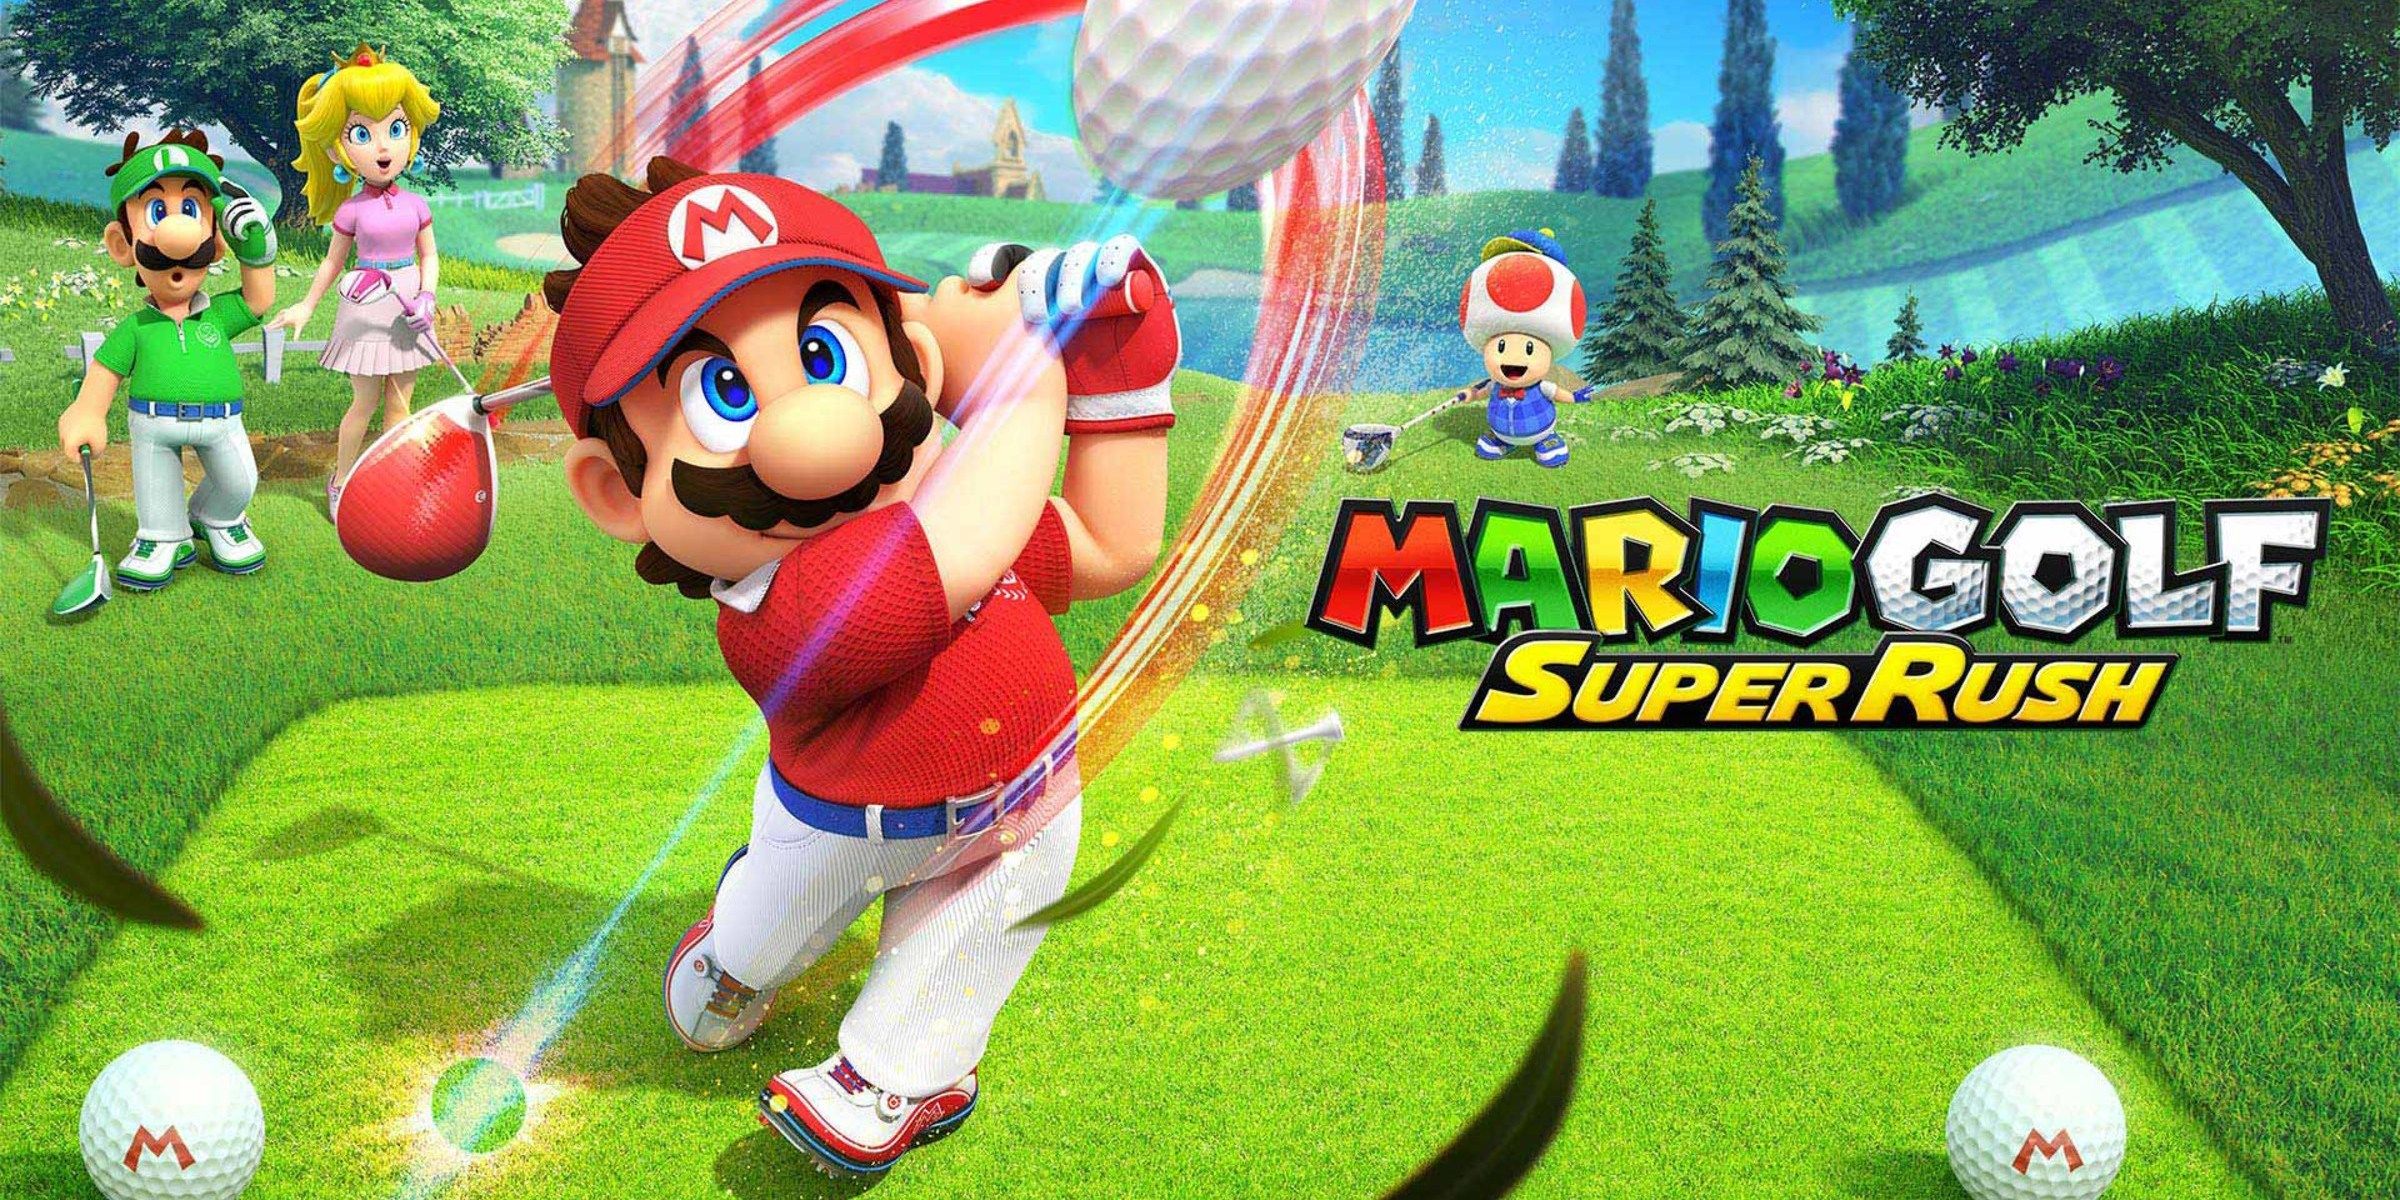 Mario hitting a golf ball while Luigi, Peach, and Toad look on on the cover art for Mario Golf Super Rush